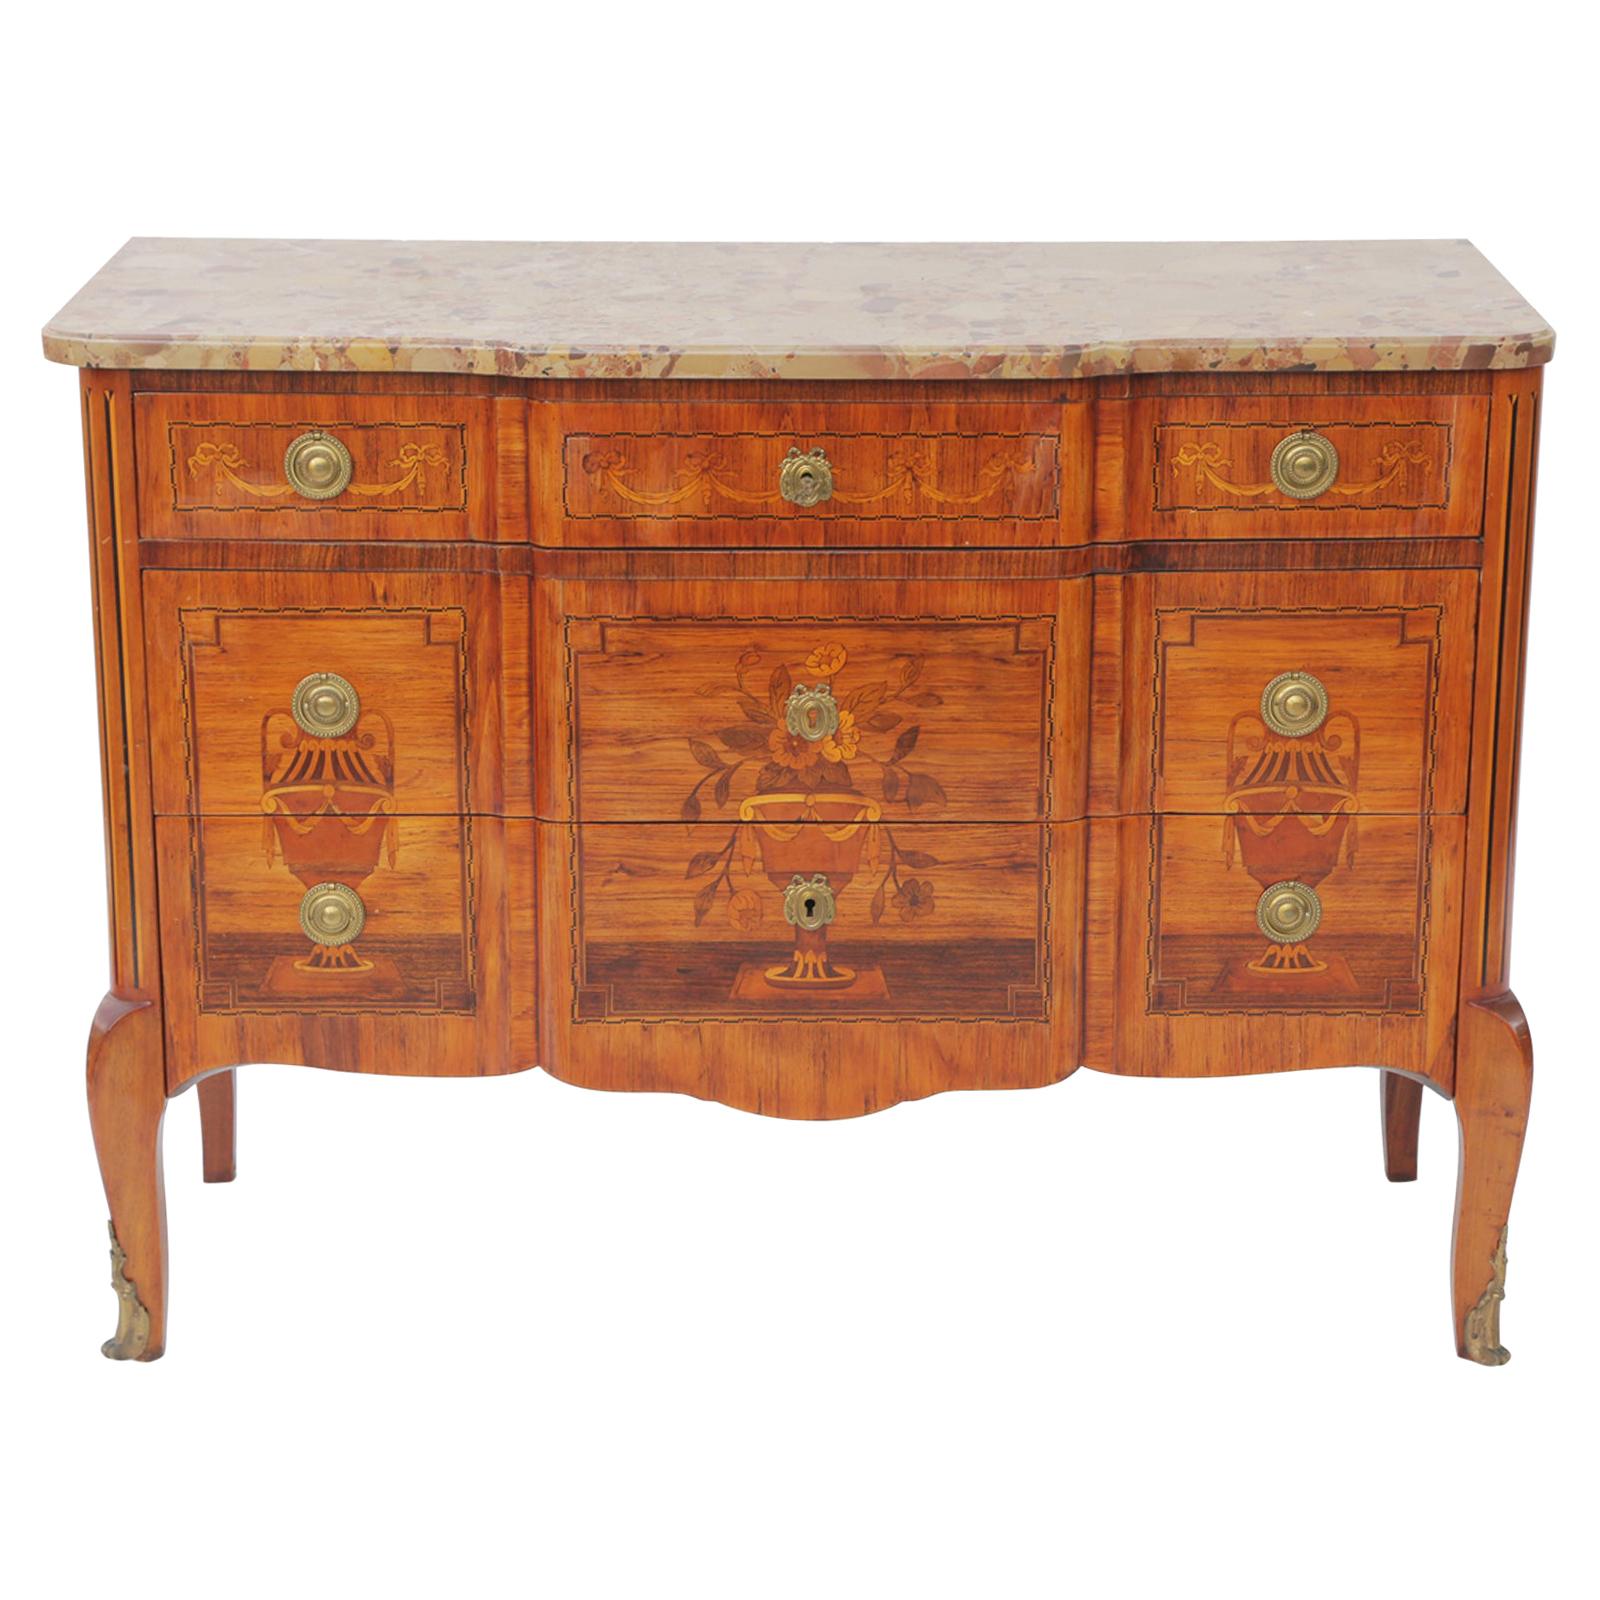 Early 19th Century Marquetry Commode